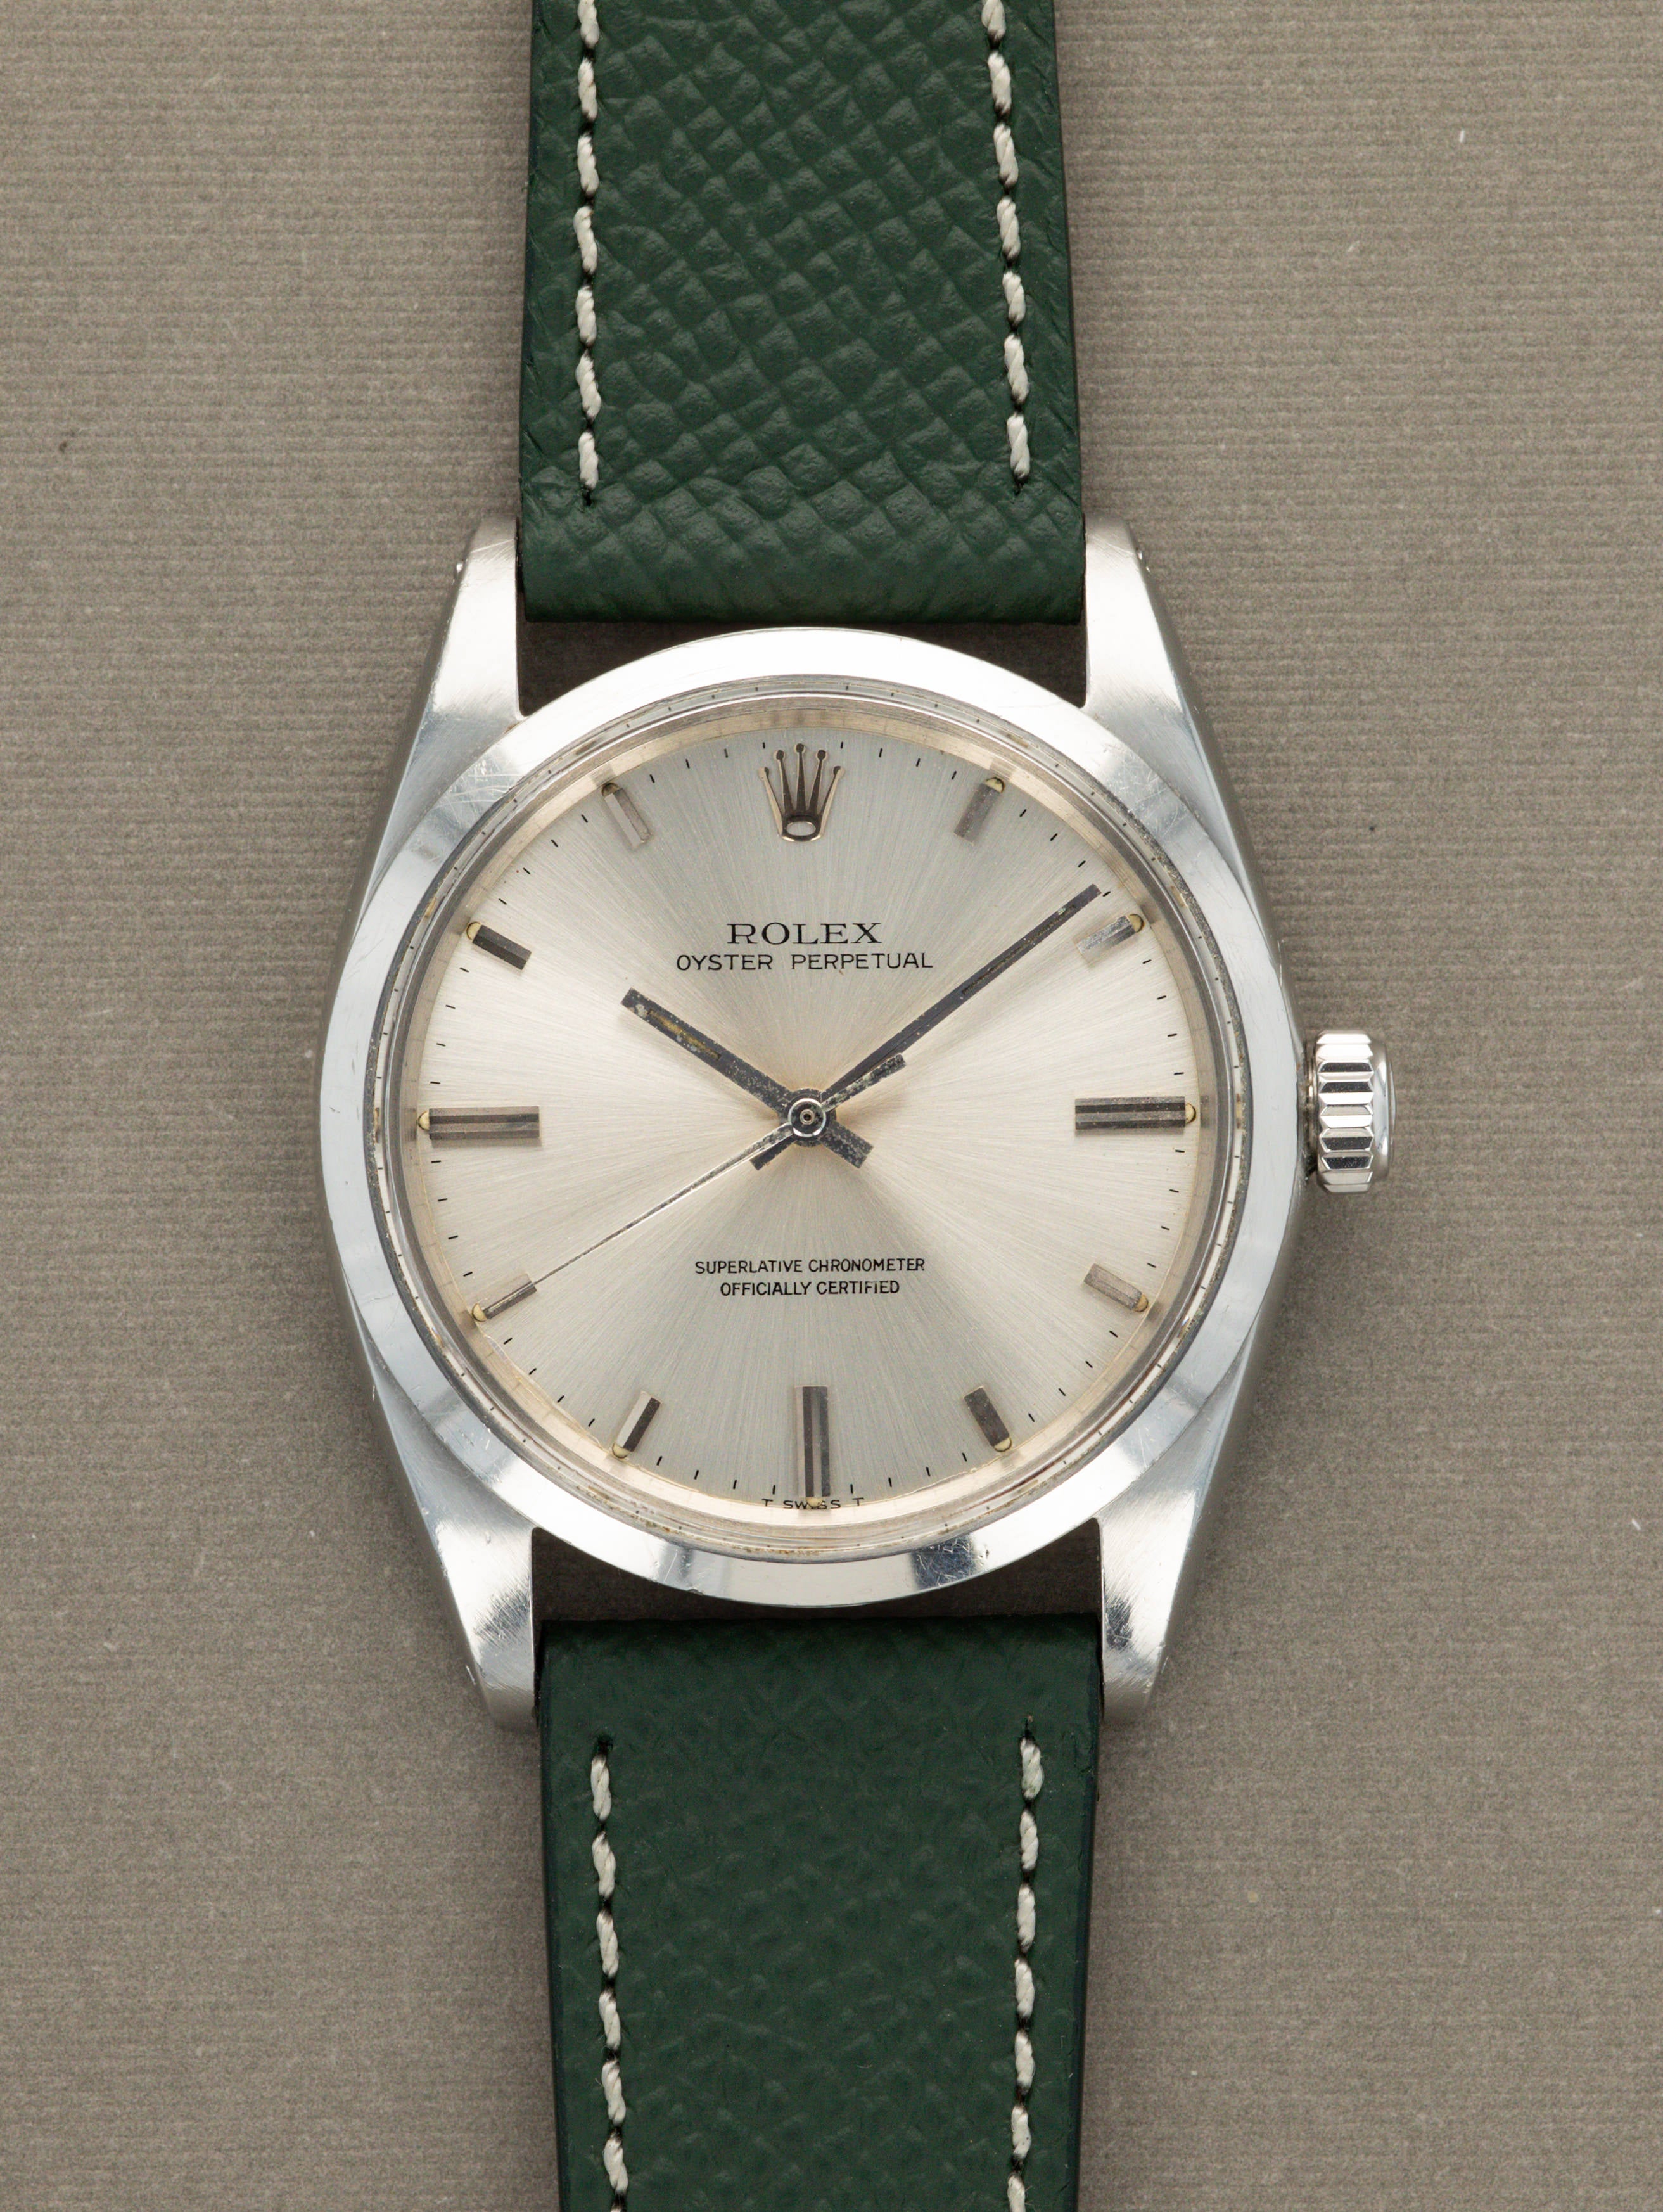 Rolex Oyster Perpetual Ref. 1018 - 'Jumbo'